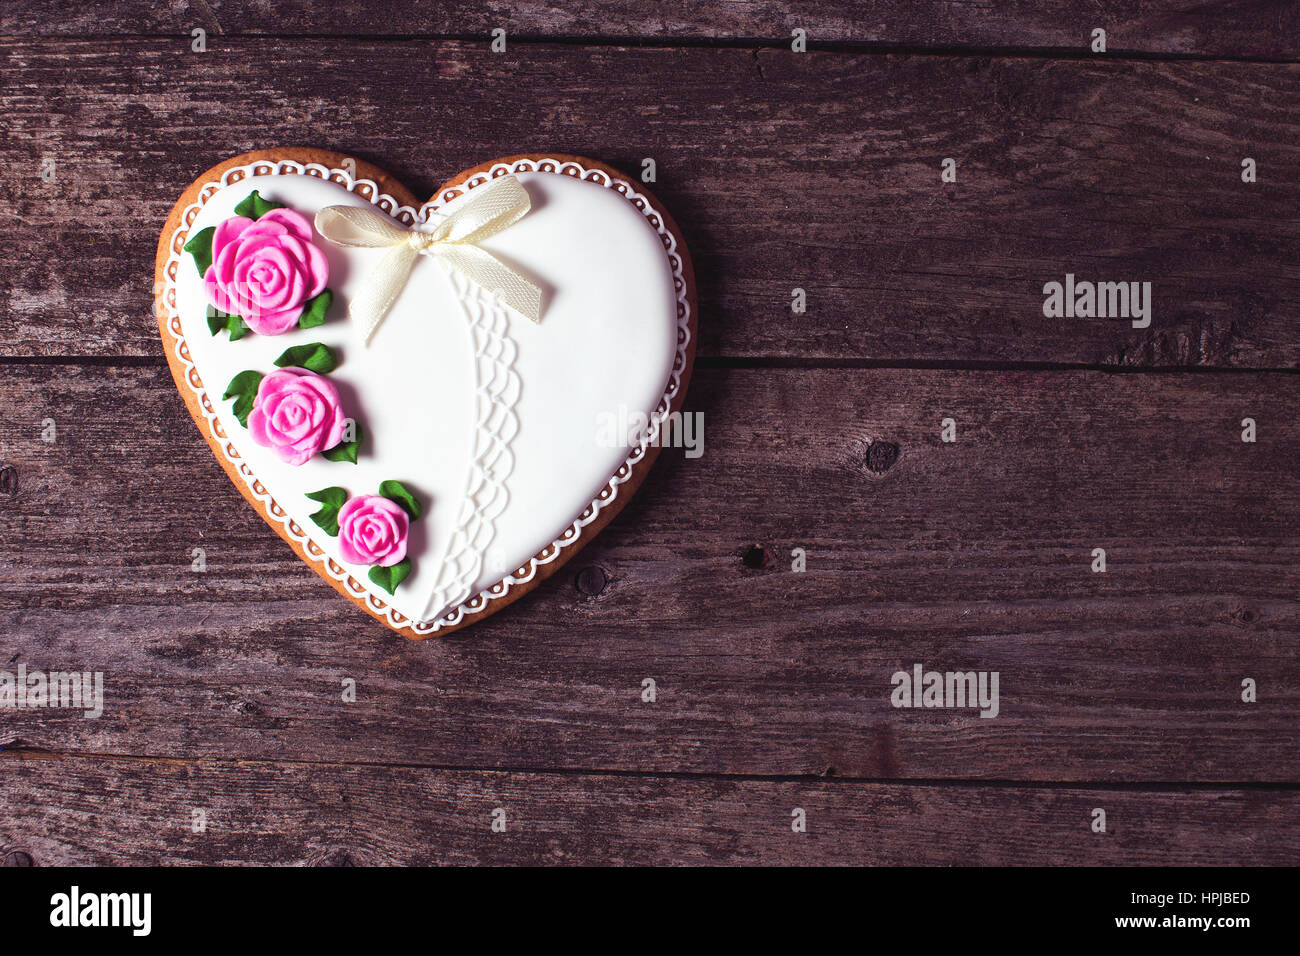 Heart shaped desert on wooden background. Present for a lover soulmate. Copy space. Stock Photo